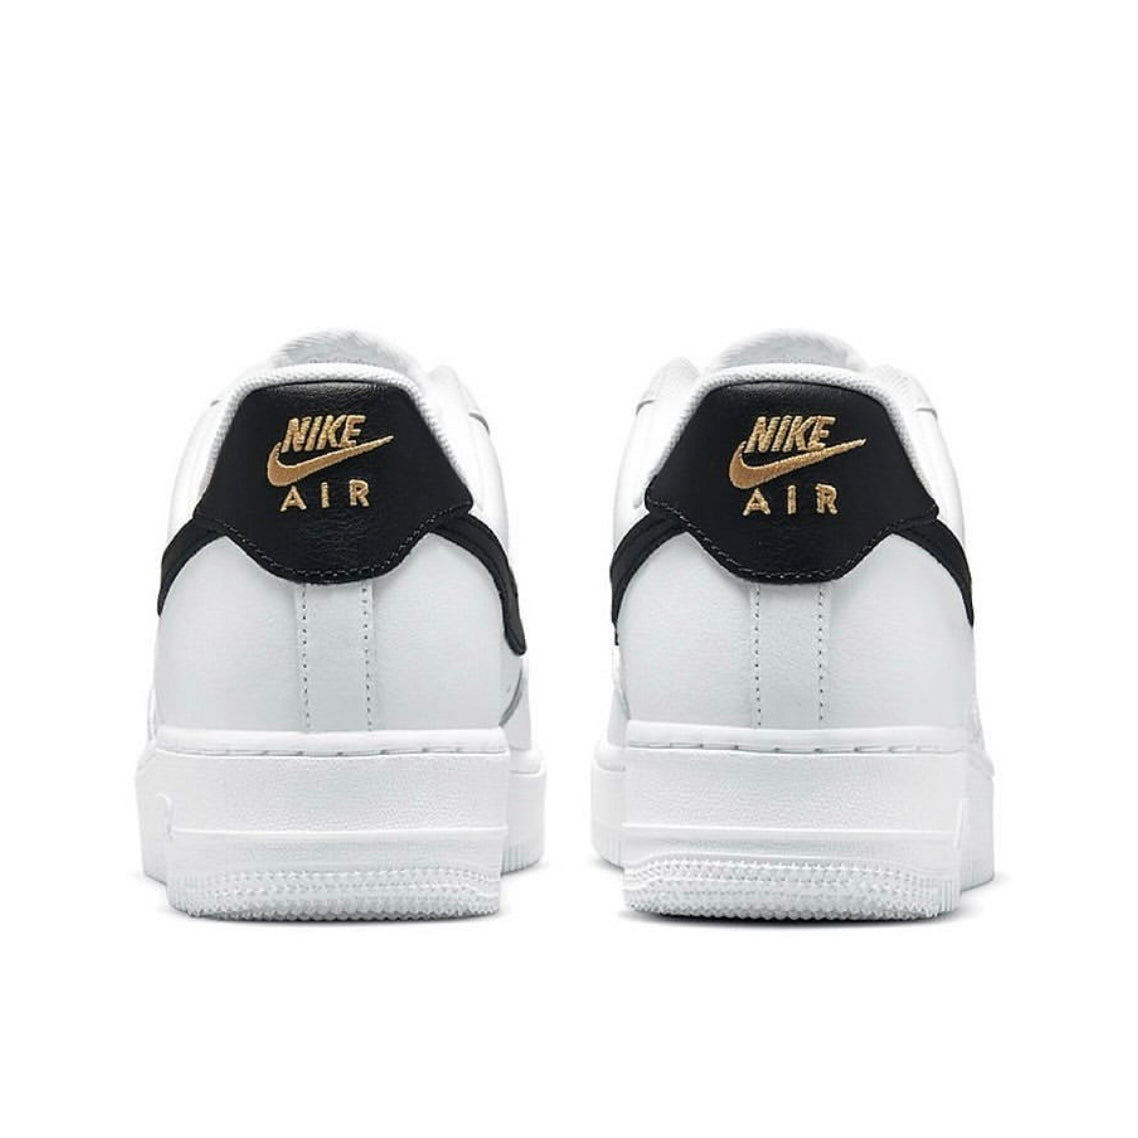 Nike Air Force 1 Low Essential "White/Black/Gold" sneakers